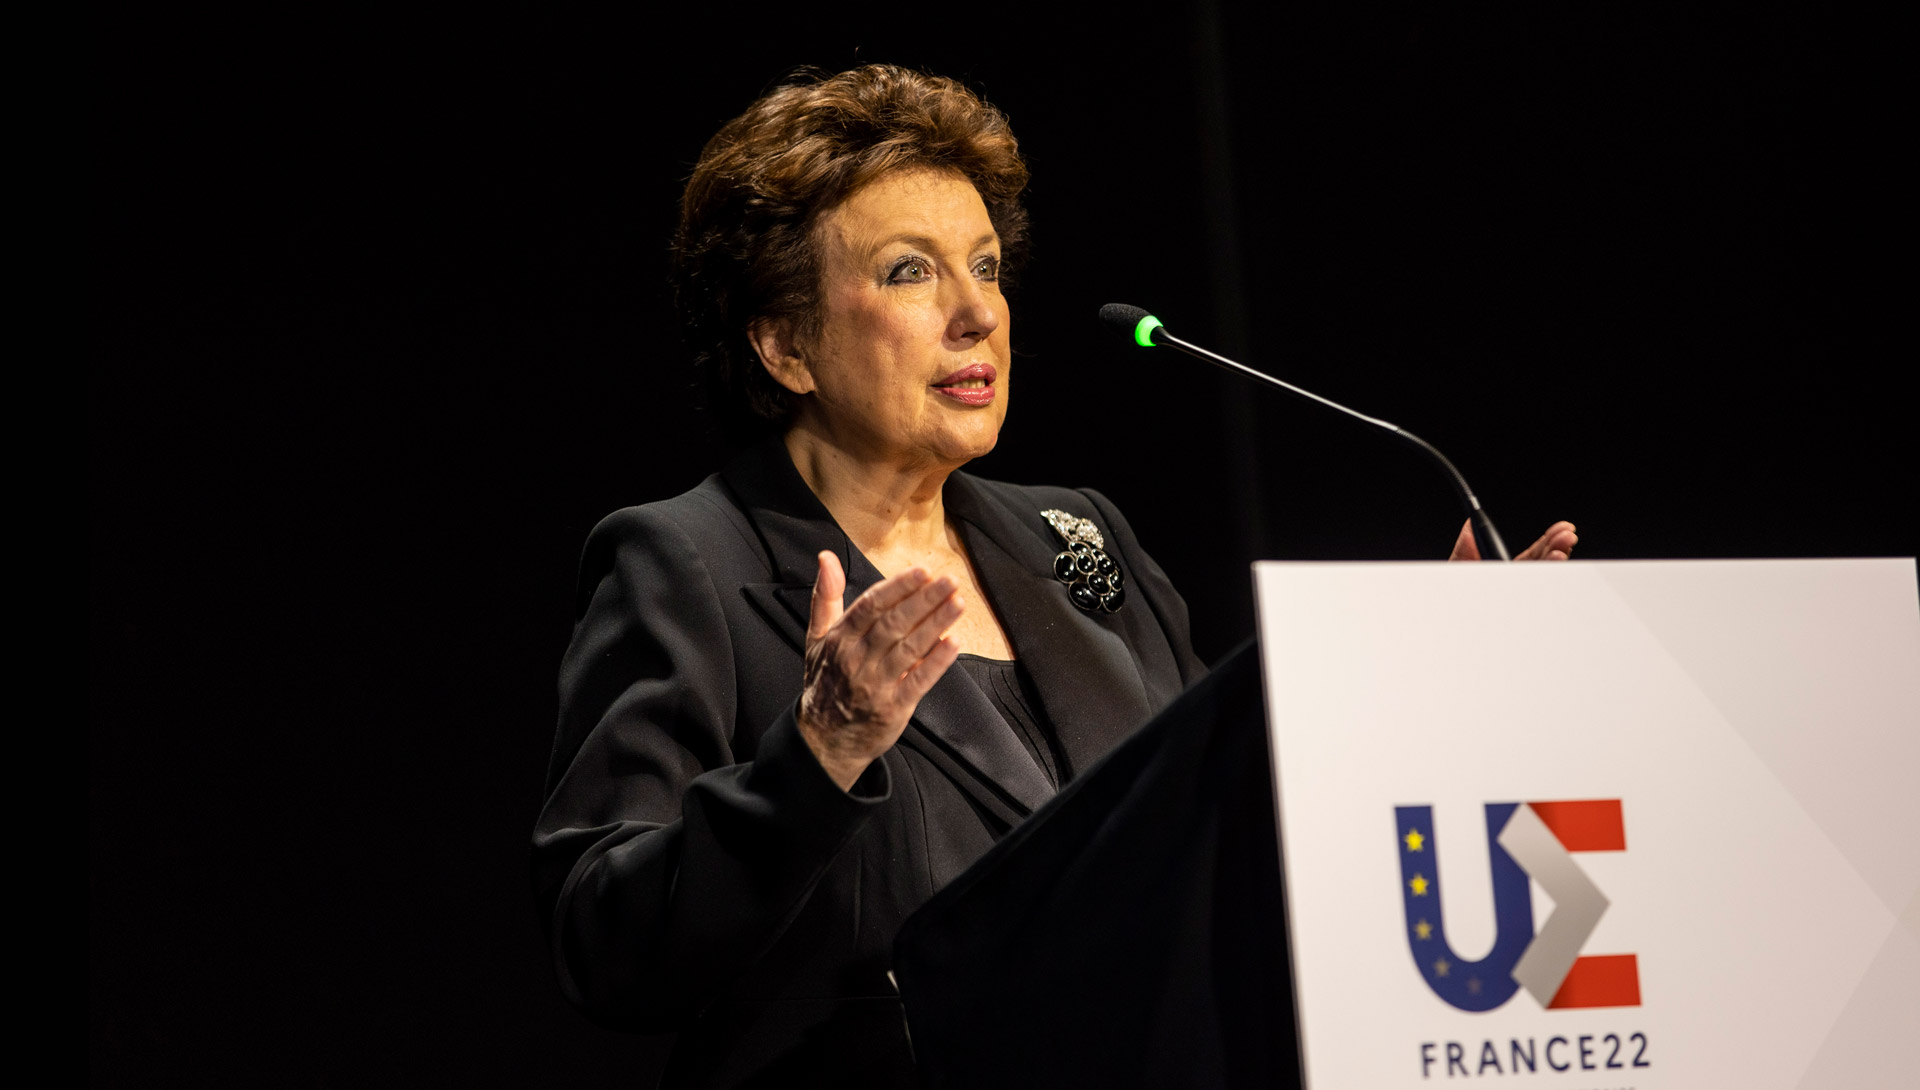 Opening speech by Roselyne Bachelot-Narquin, Minister of Culture